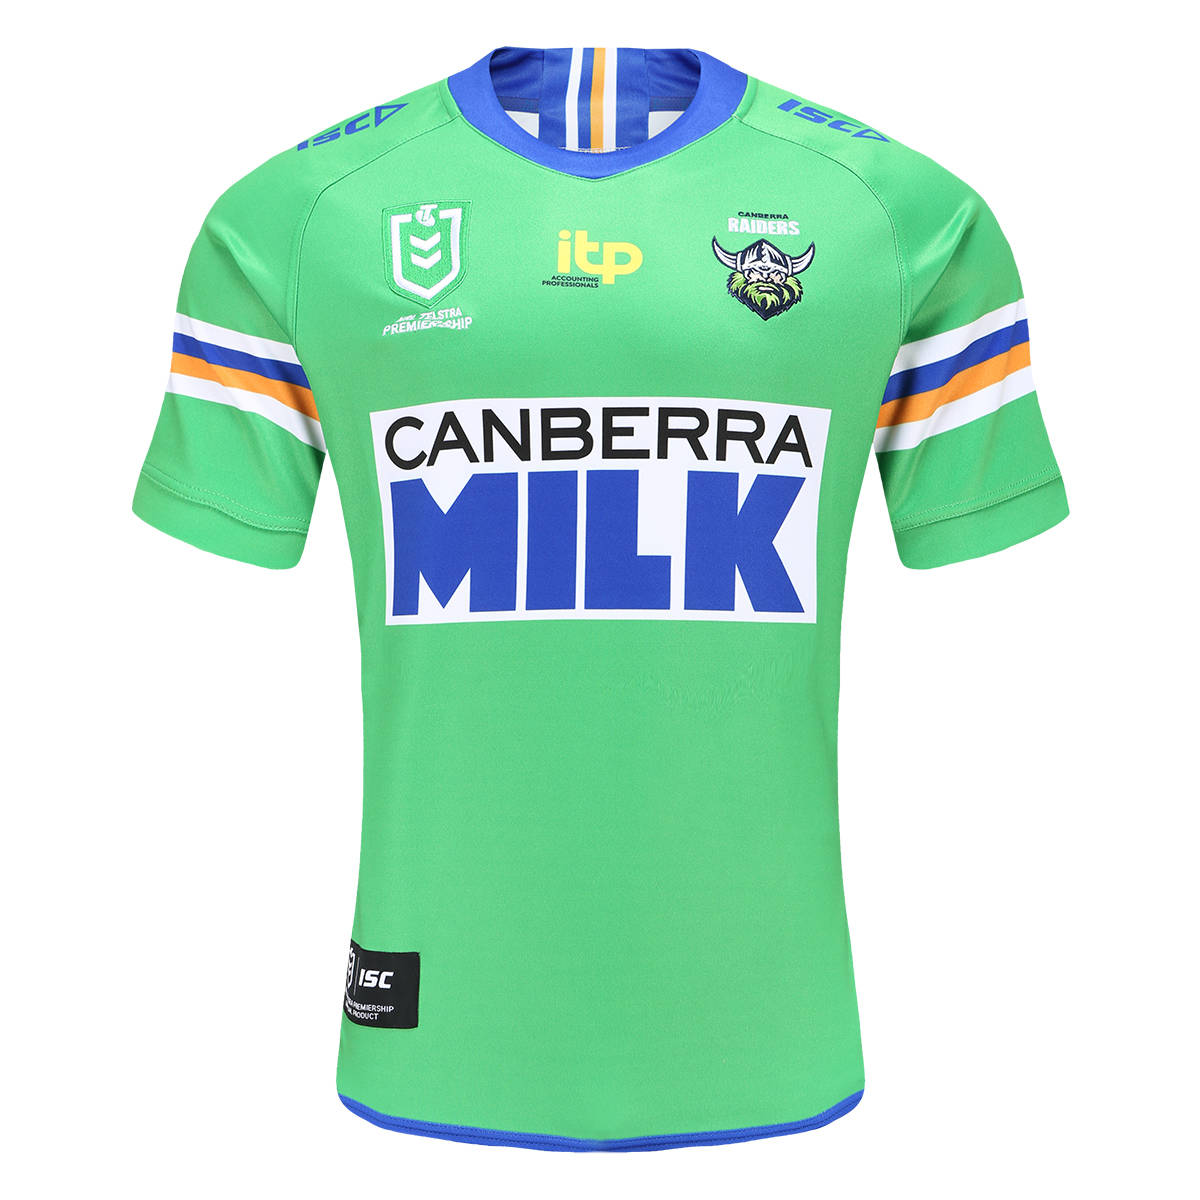 Canberra Raiders Shop – 2021 Adults Heritage Jersey